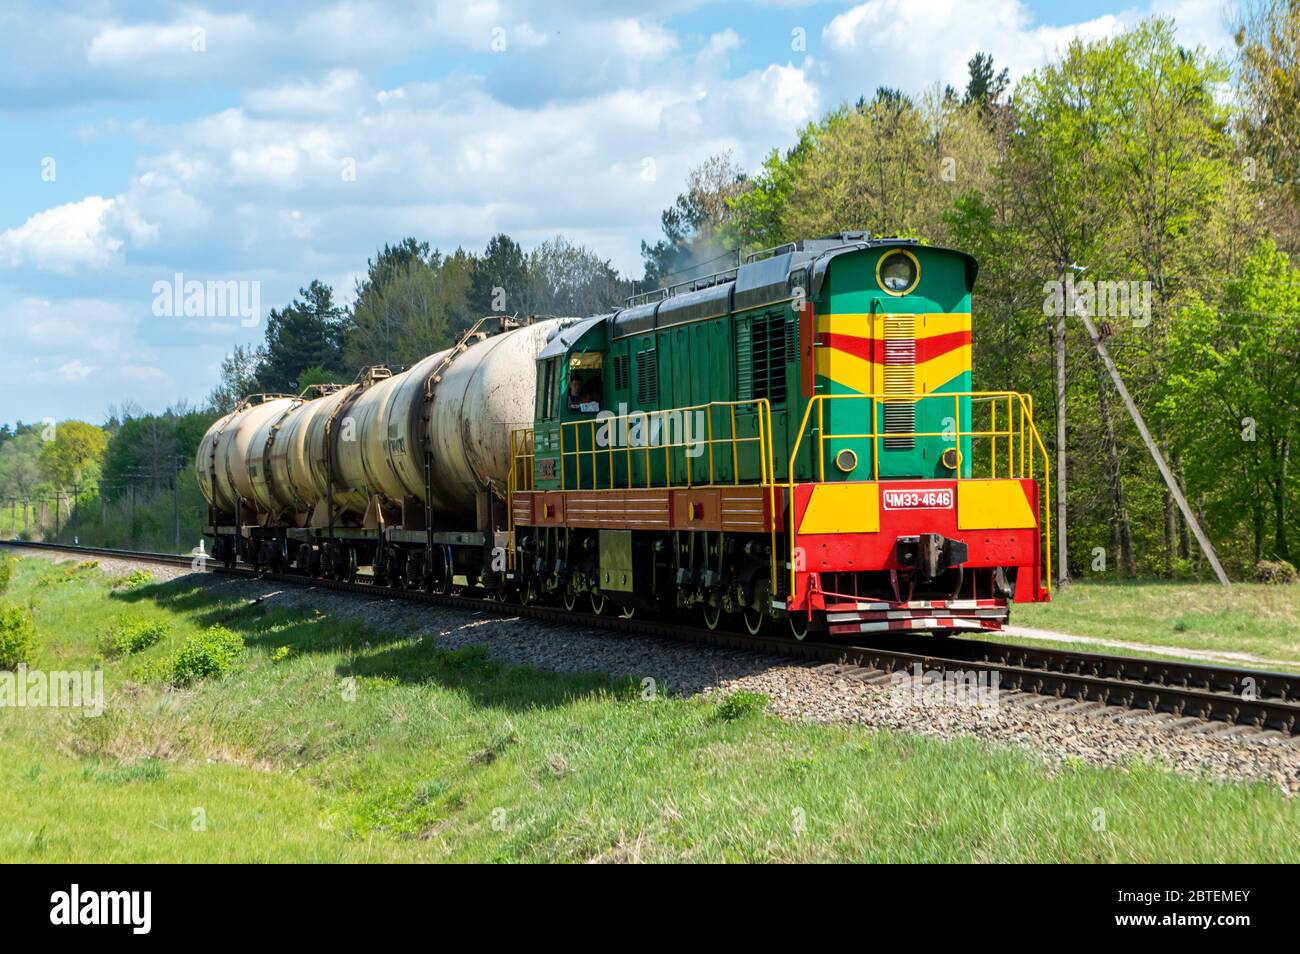 Freight diesel locomotive close view. Oil delivery. Oil shipping train. Green locomotive. freight train oil shipment. Stock Photo